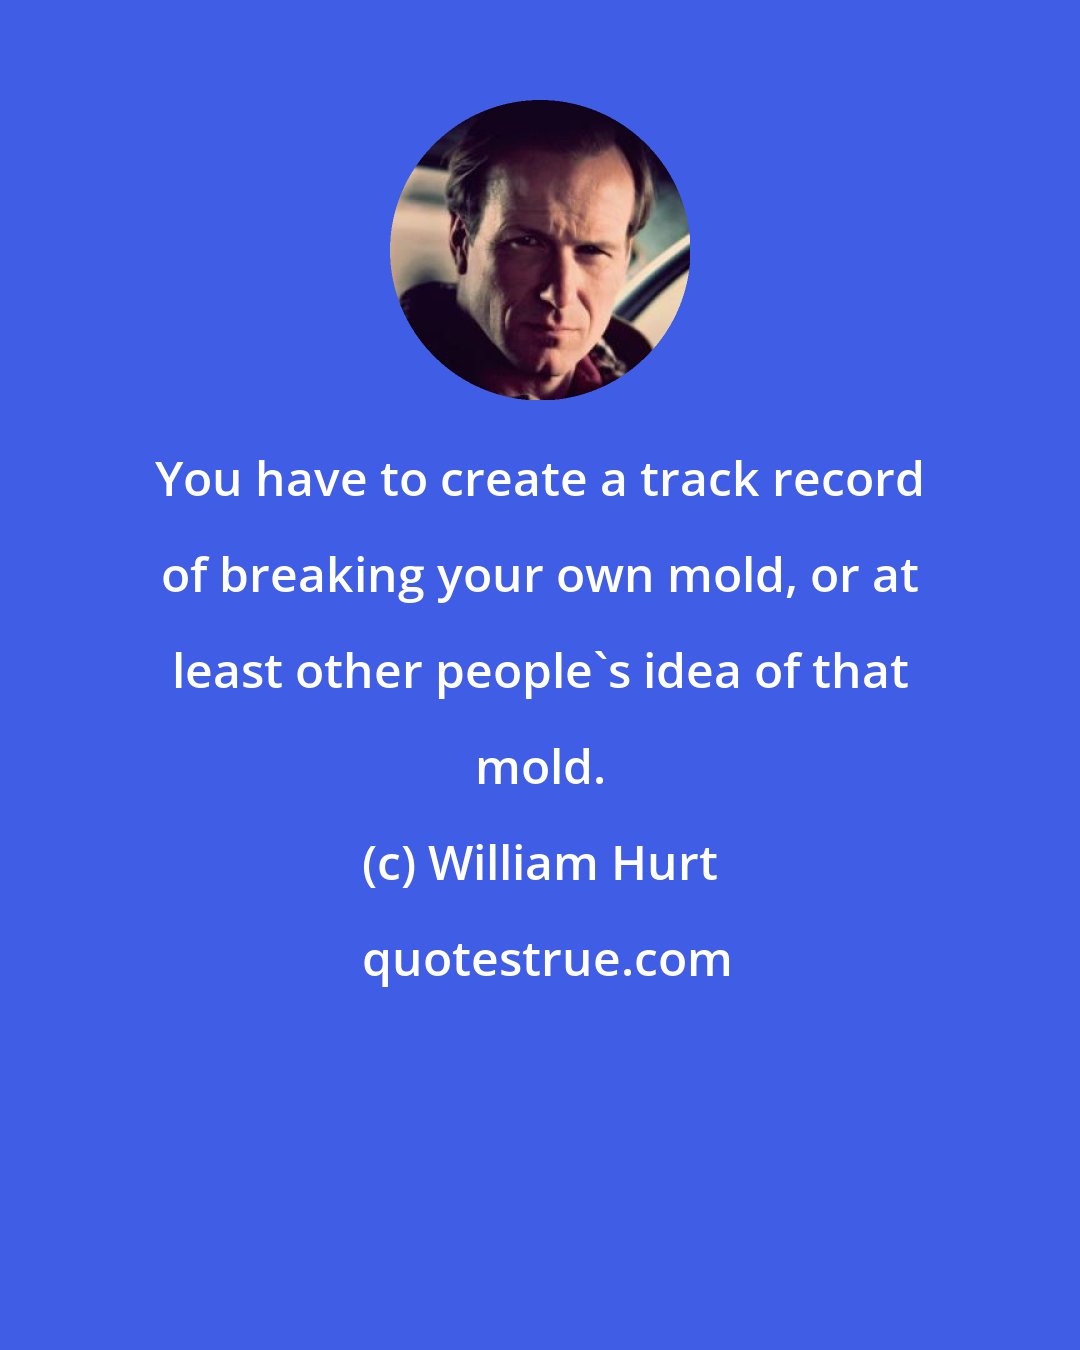 William Hurt: You have to create a track record of breaking your own mold, or at least other people's idea of that mold.